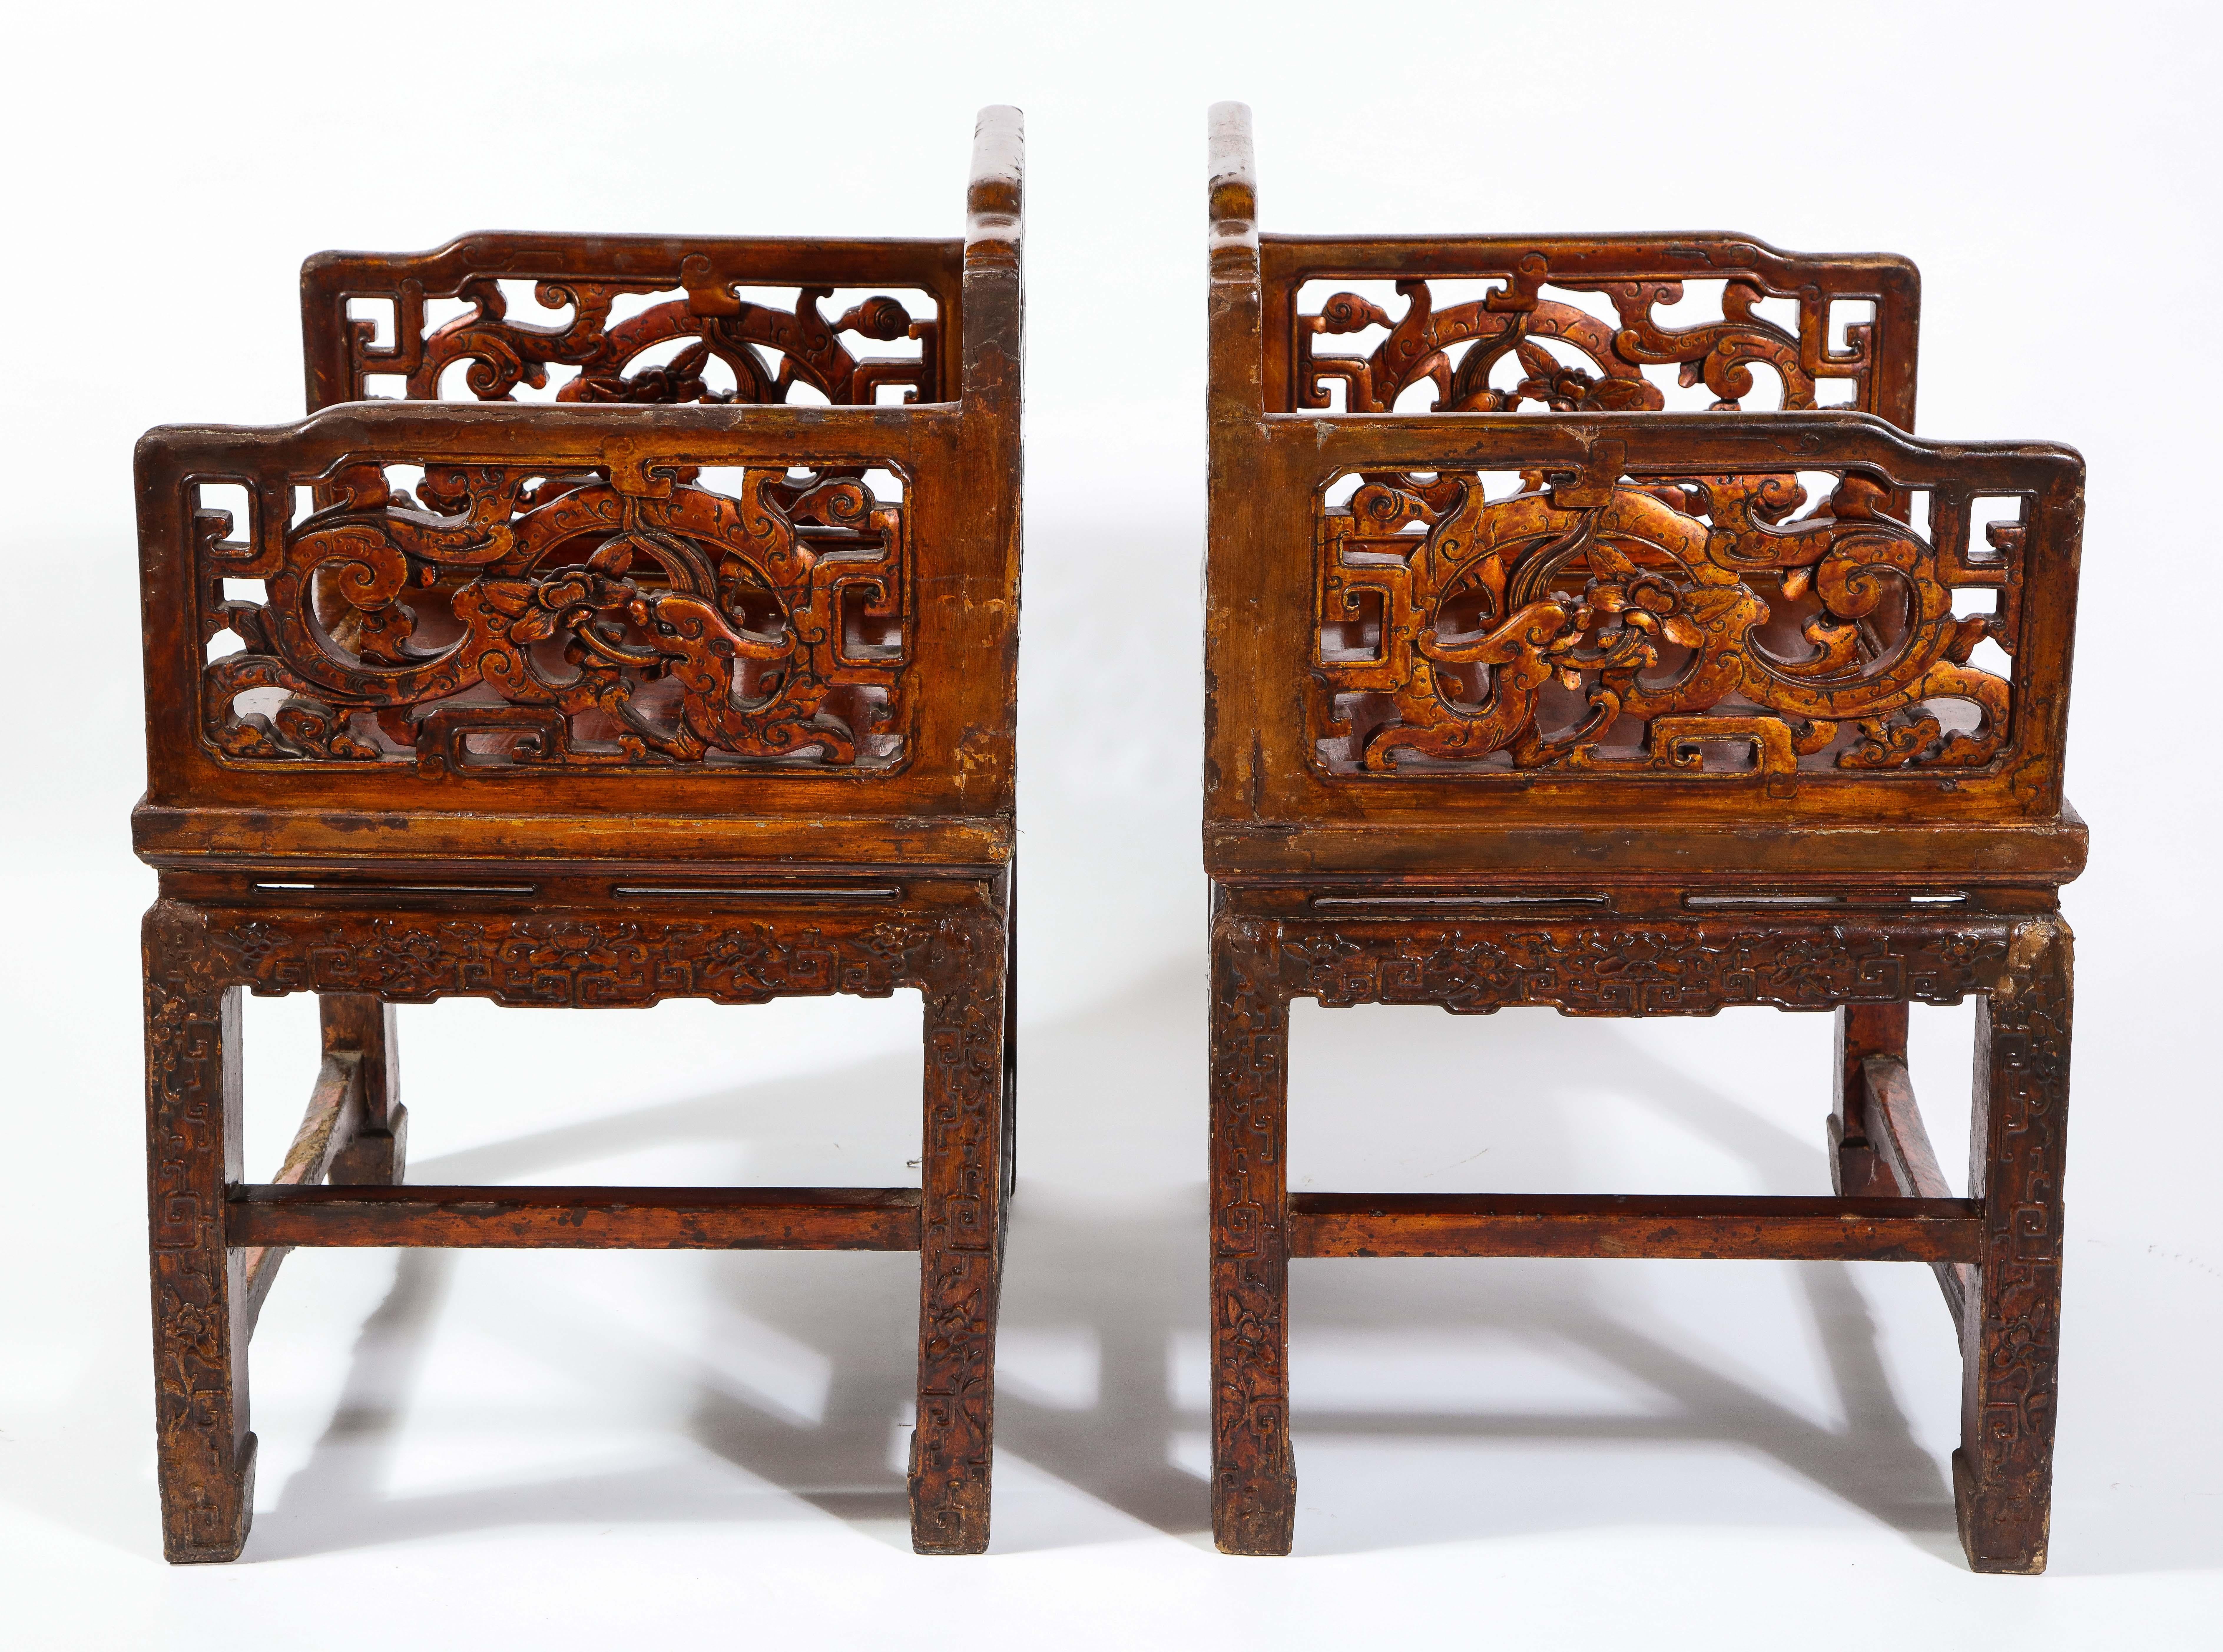 Hand-Carved Pair of 19th Century Chinese Lacquered Hardwood Open Work Throne Chairs